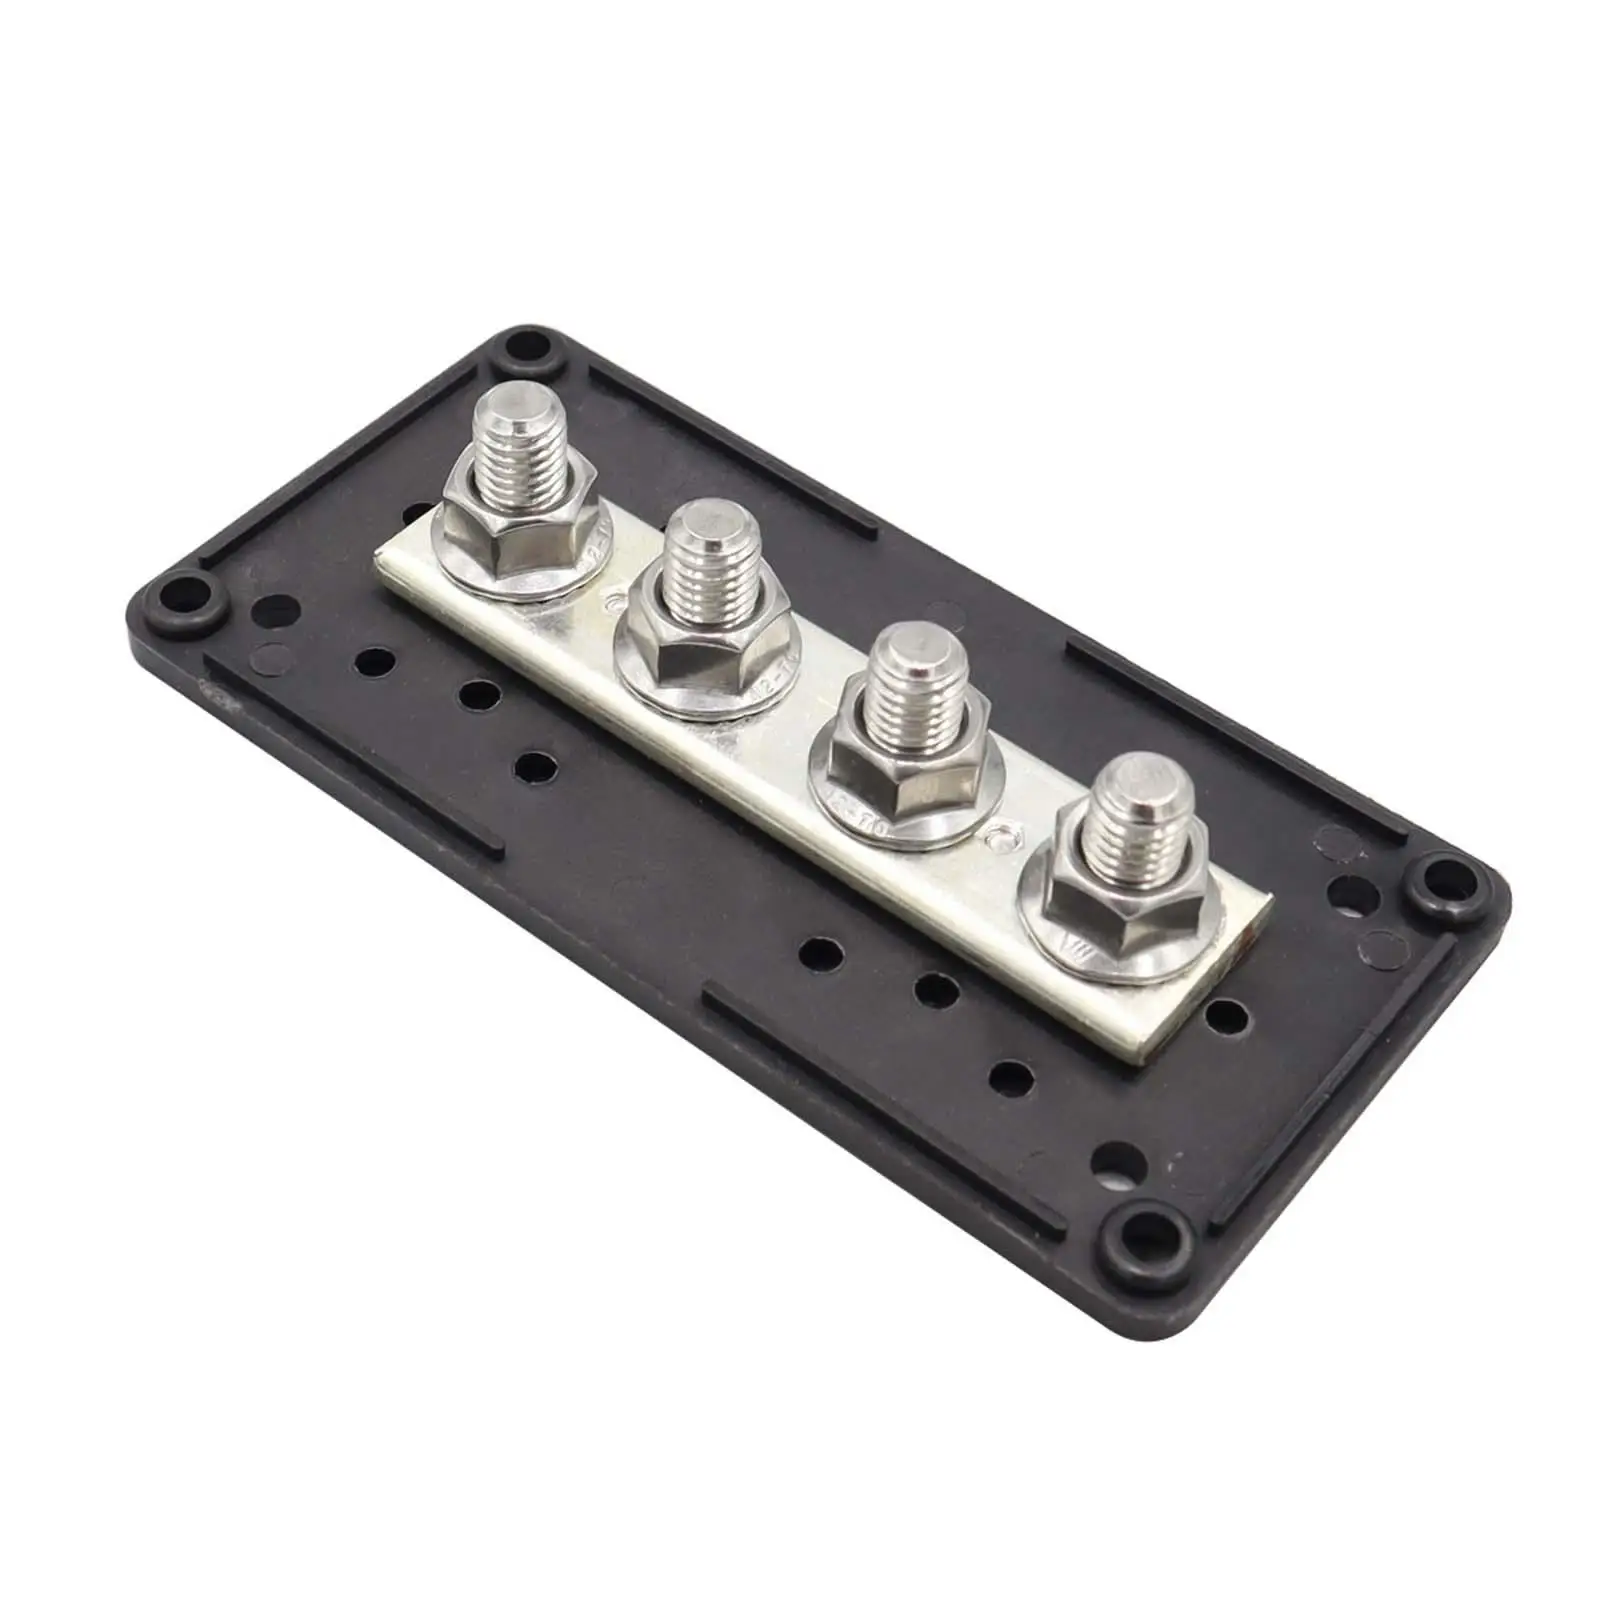 Power Distribution Block 4 Stud 48V 300A M10 Post for Automotive, Van, Trucks, Yacht Boat Power Distribution Block with Cover